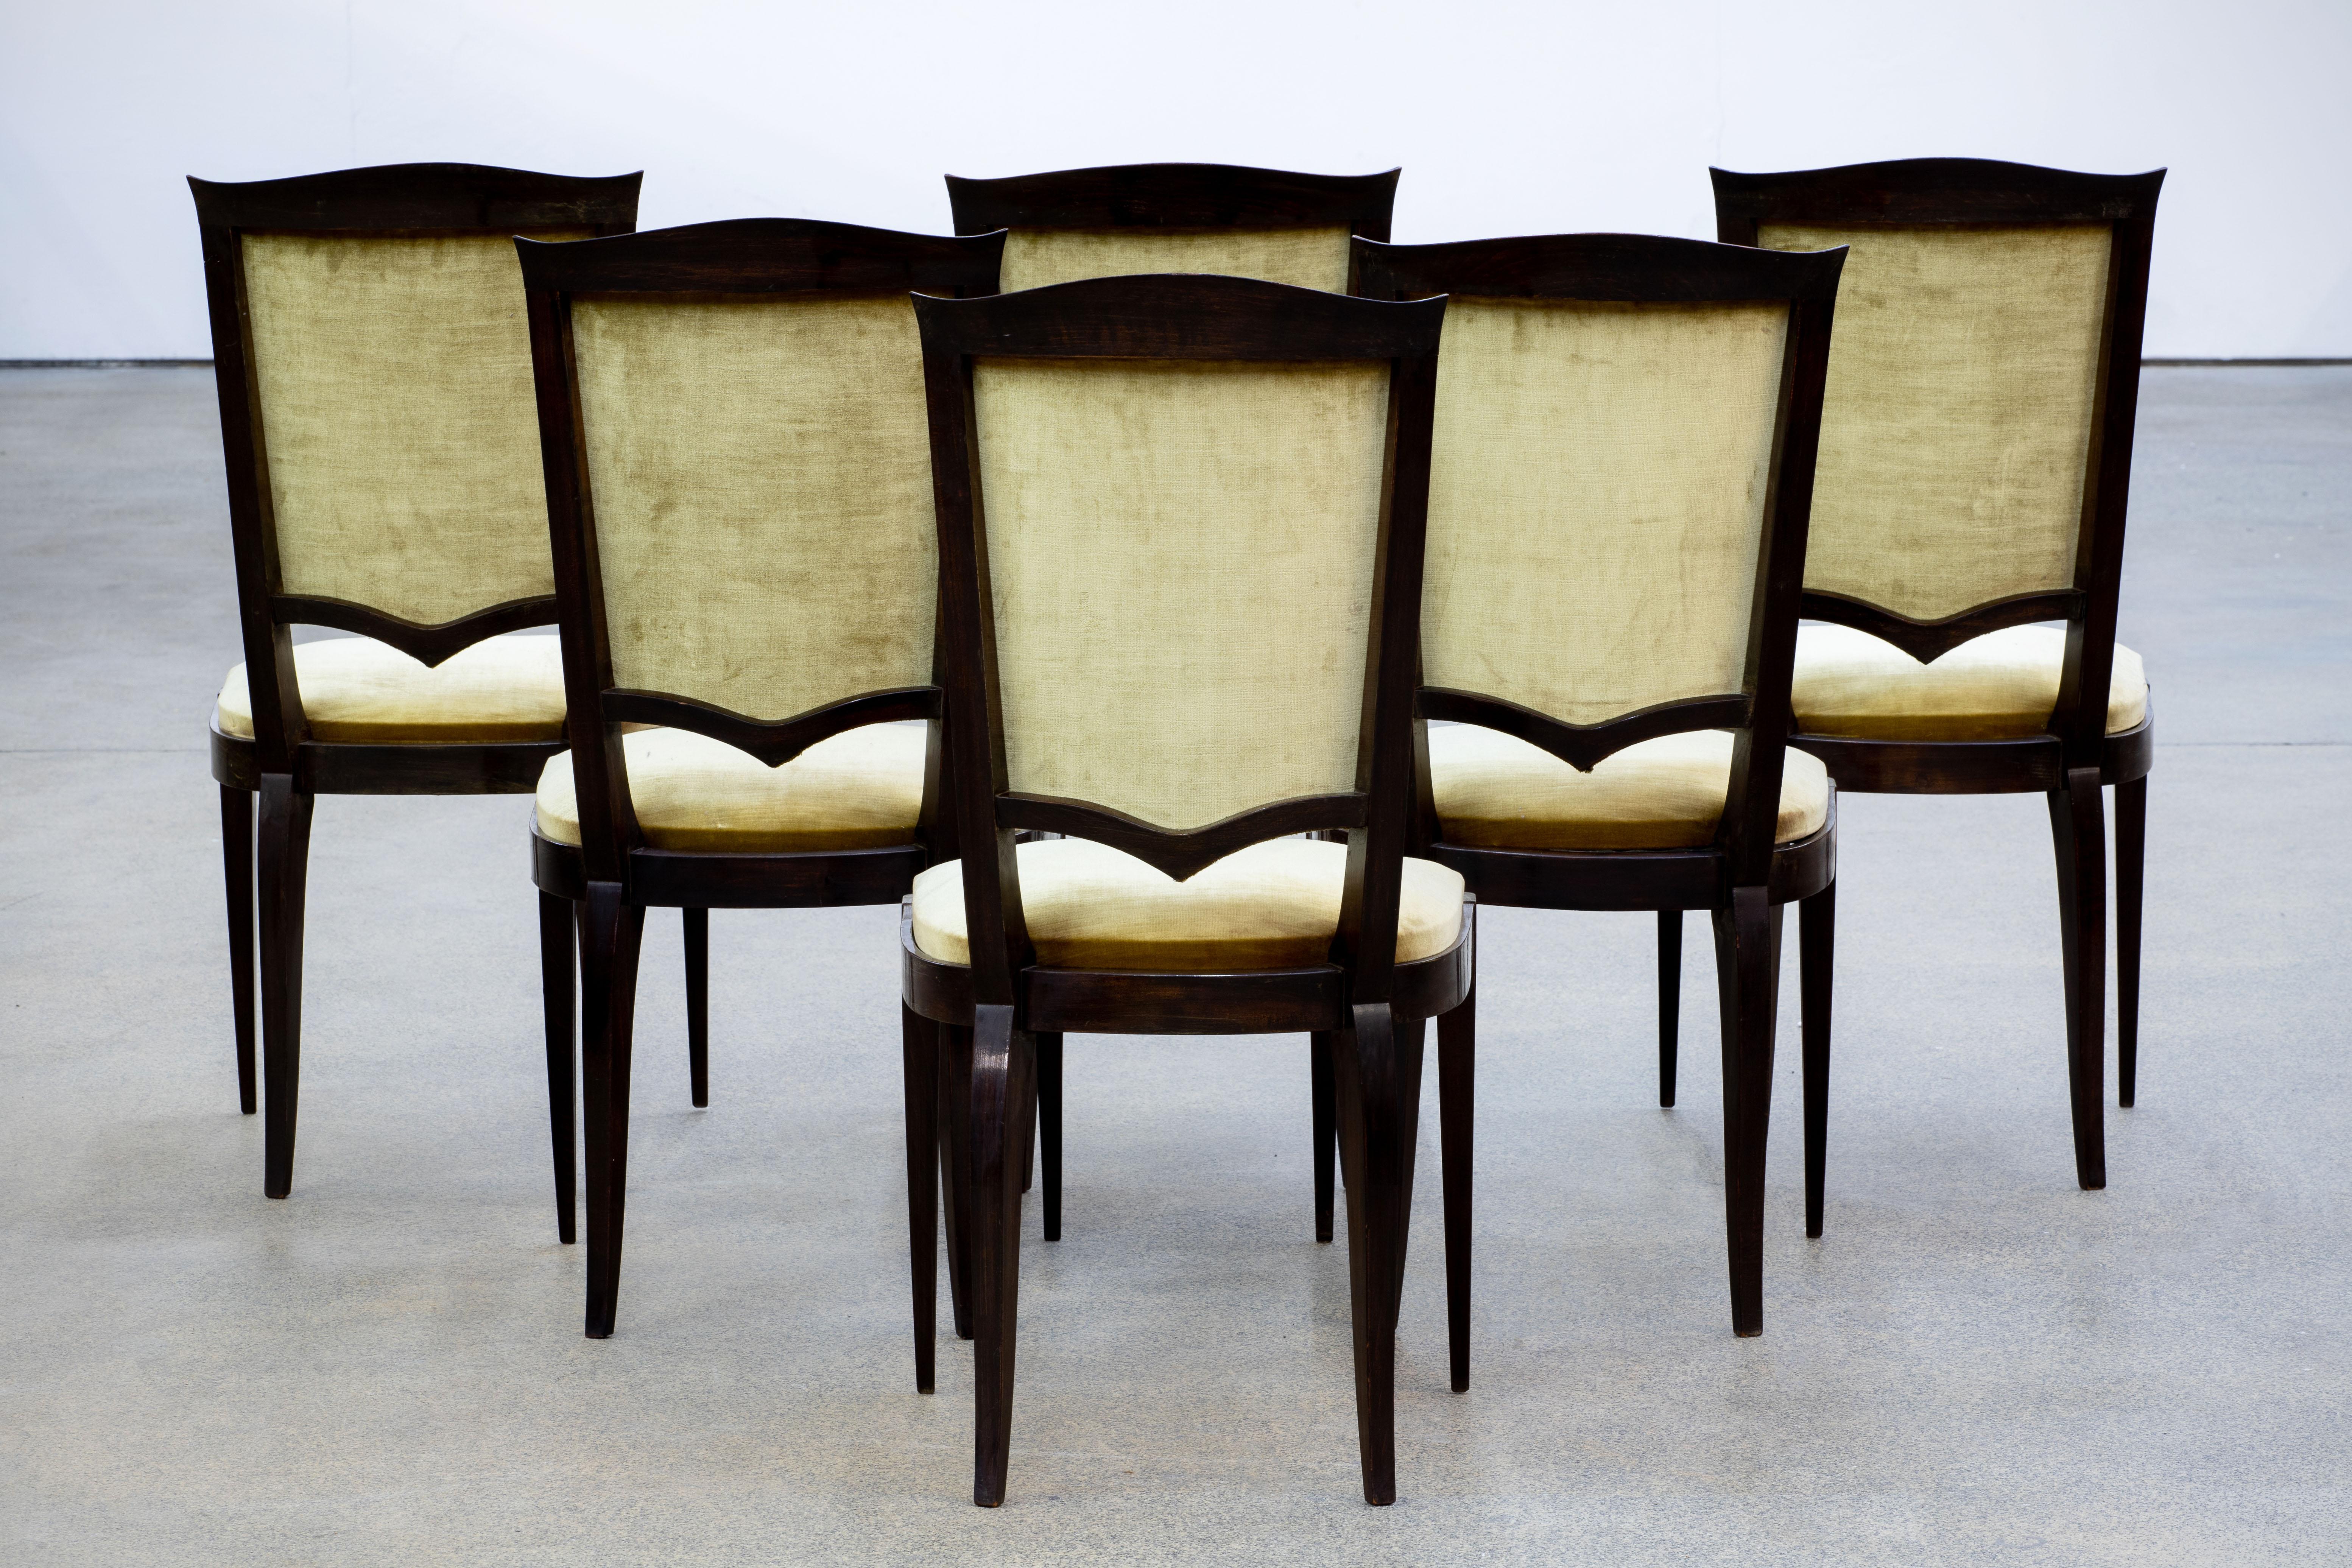 Brass Art Deco Set of 6 Oak Chairs, France, 1940 For Sale